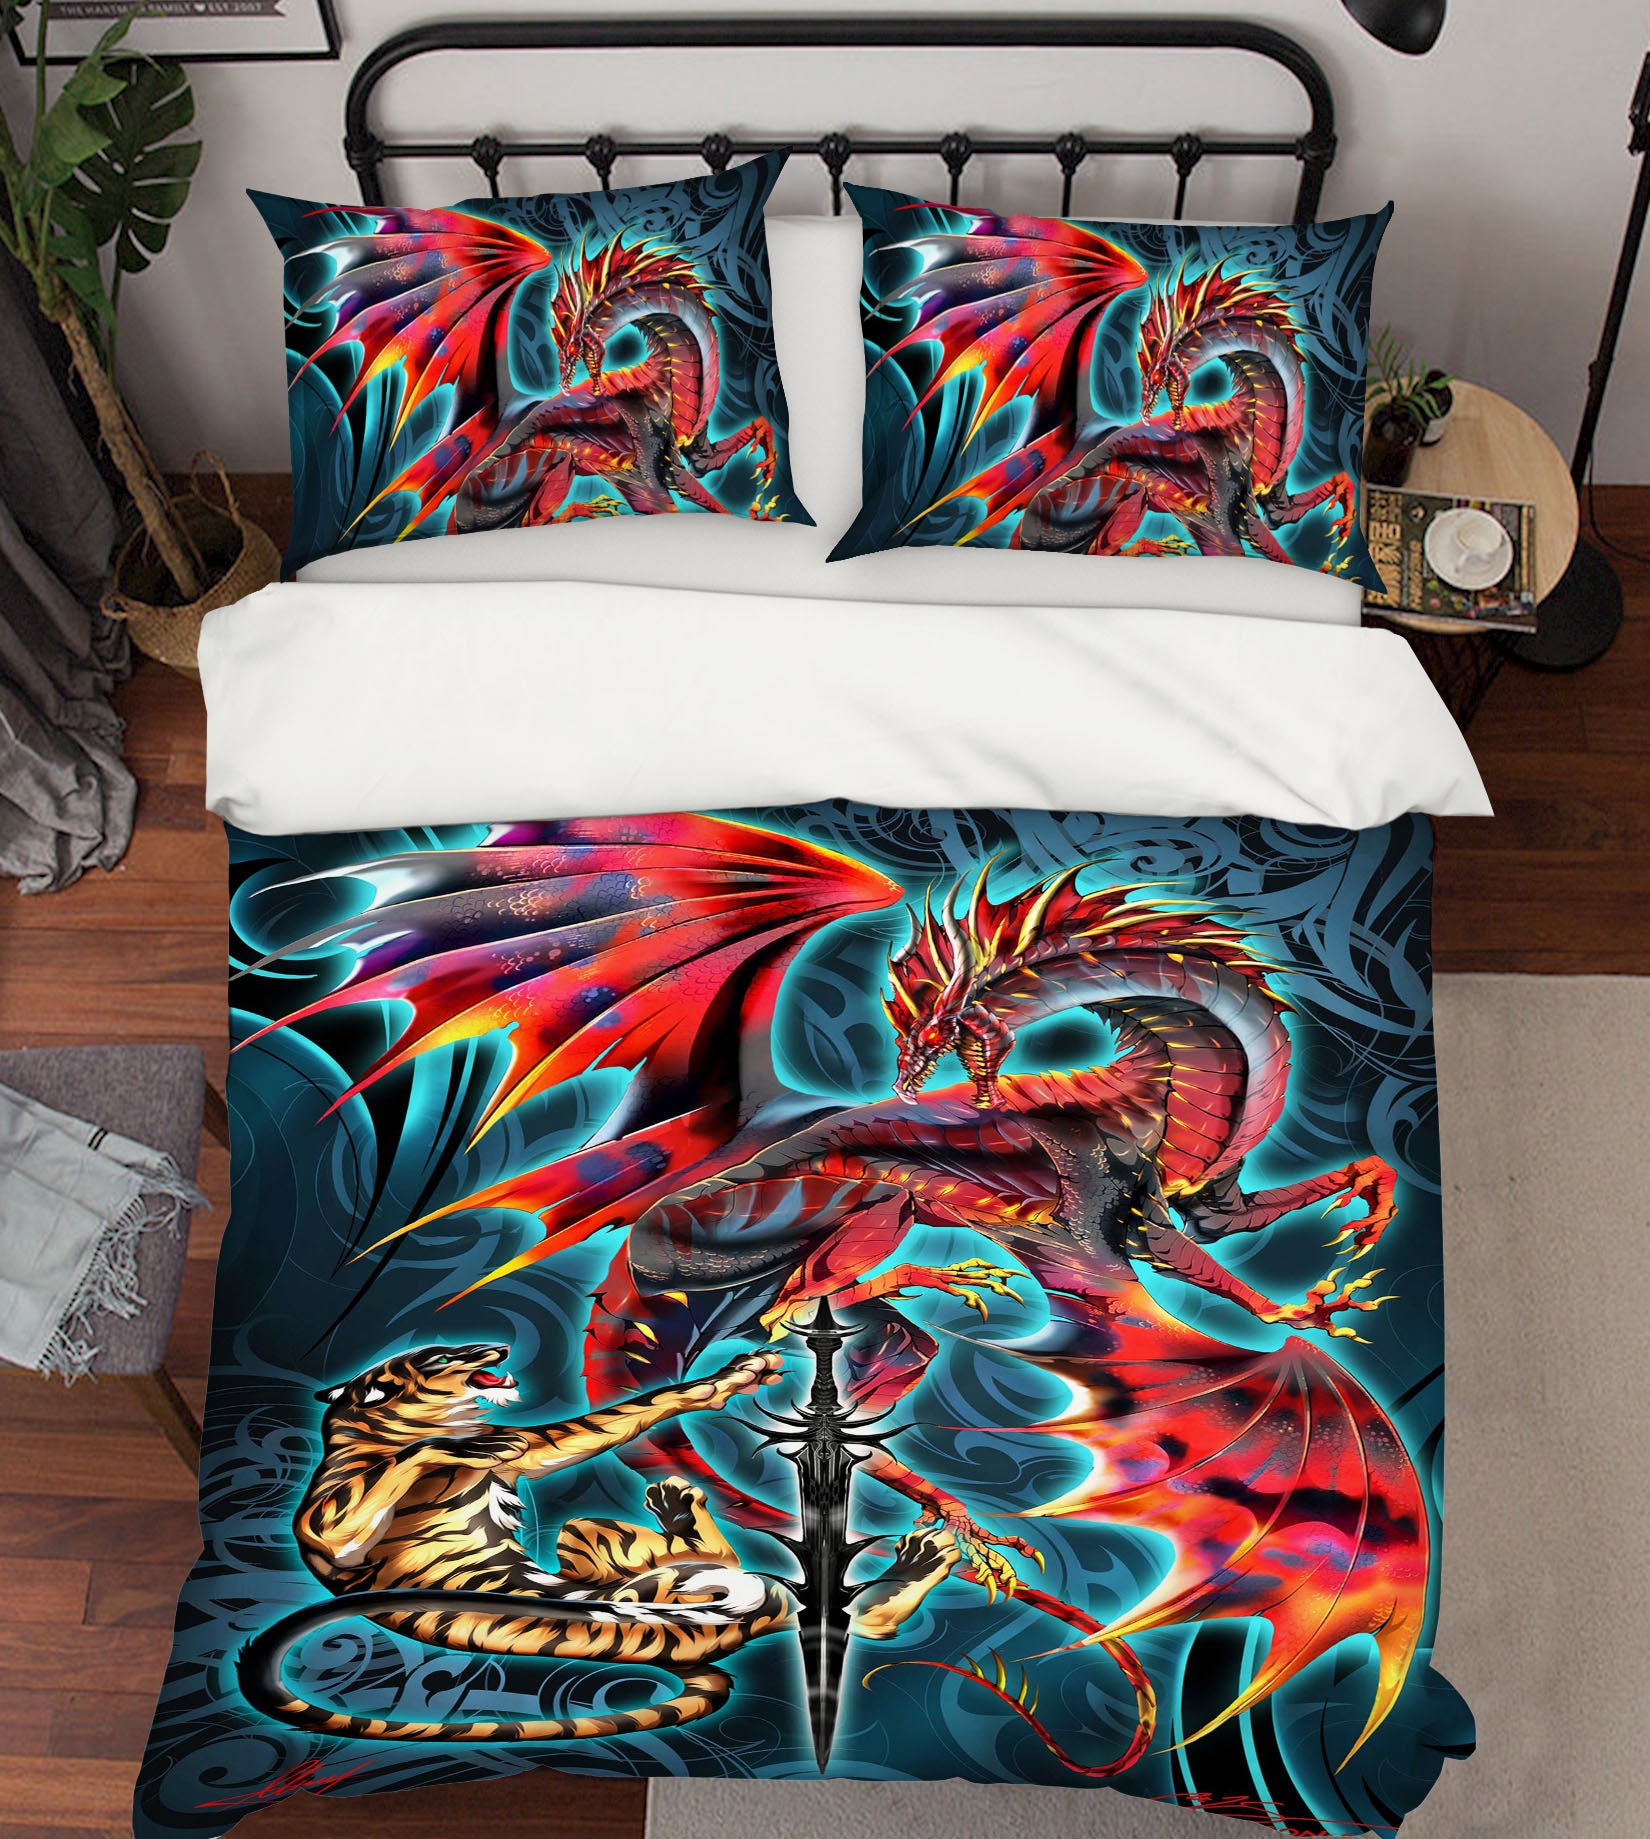 3D Dragon Tiger 8321 Ruth Thompson Bedding Bed Pillowcases Quilt Cover Duvet Cover